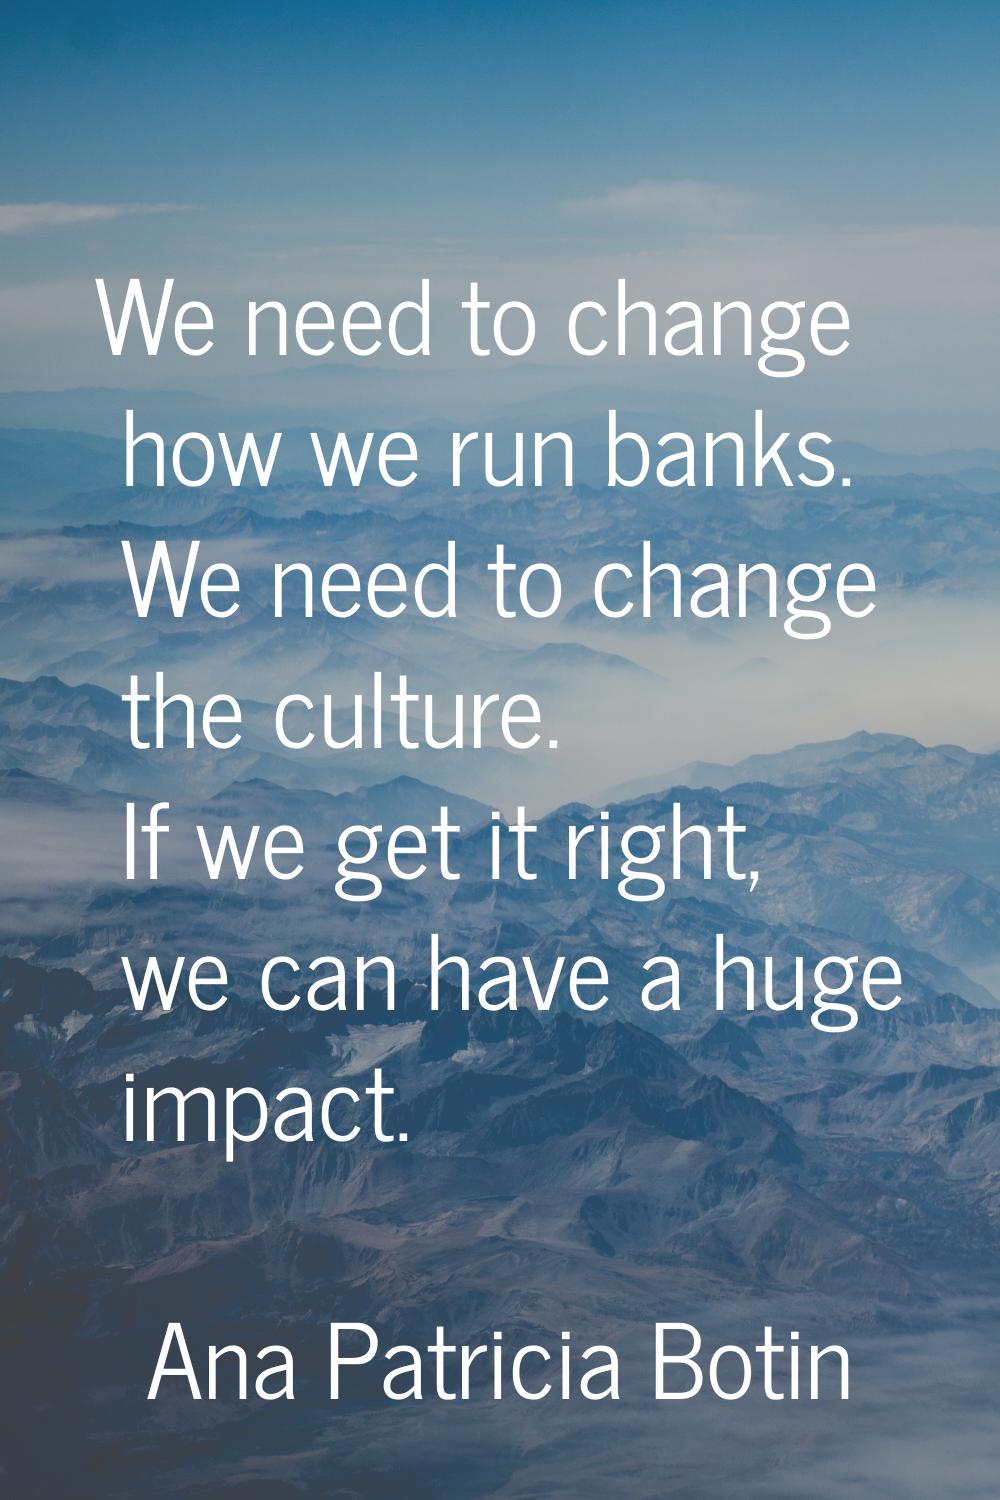 We need to change how we run banks. We need to change the culture. If we get it right, we can have 